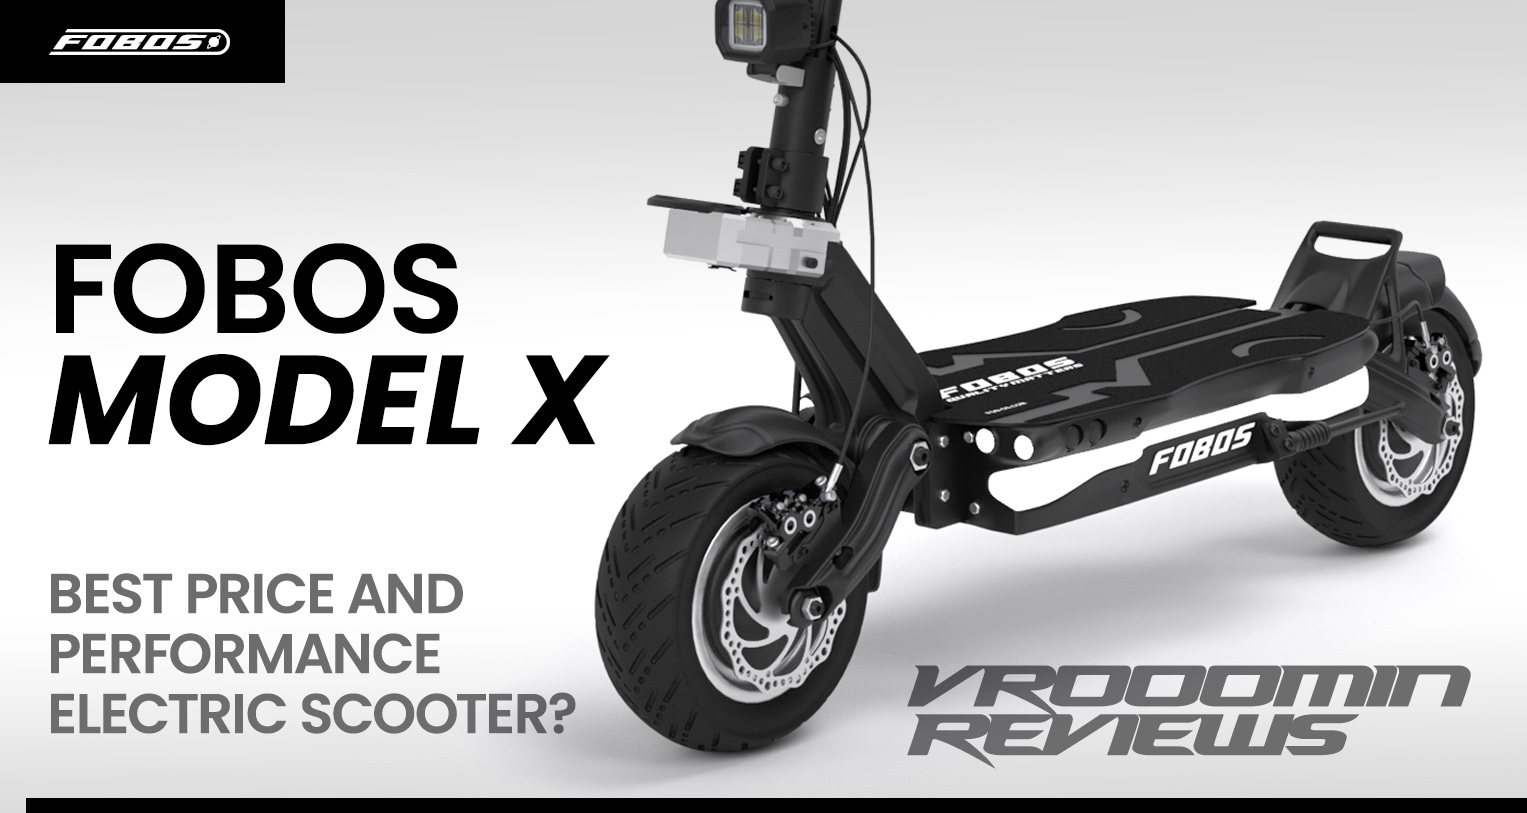 Fobos Model X Electric Scooter